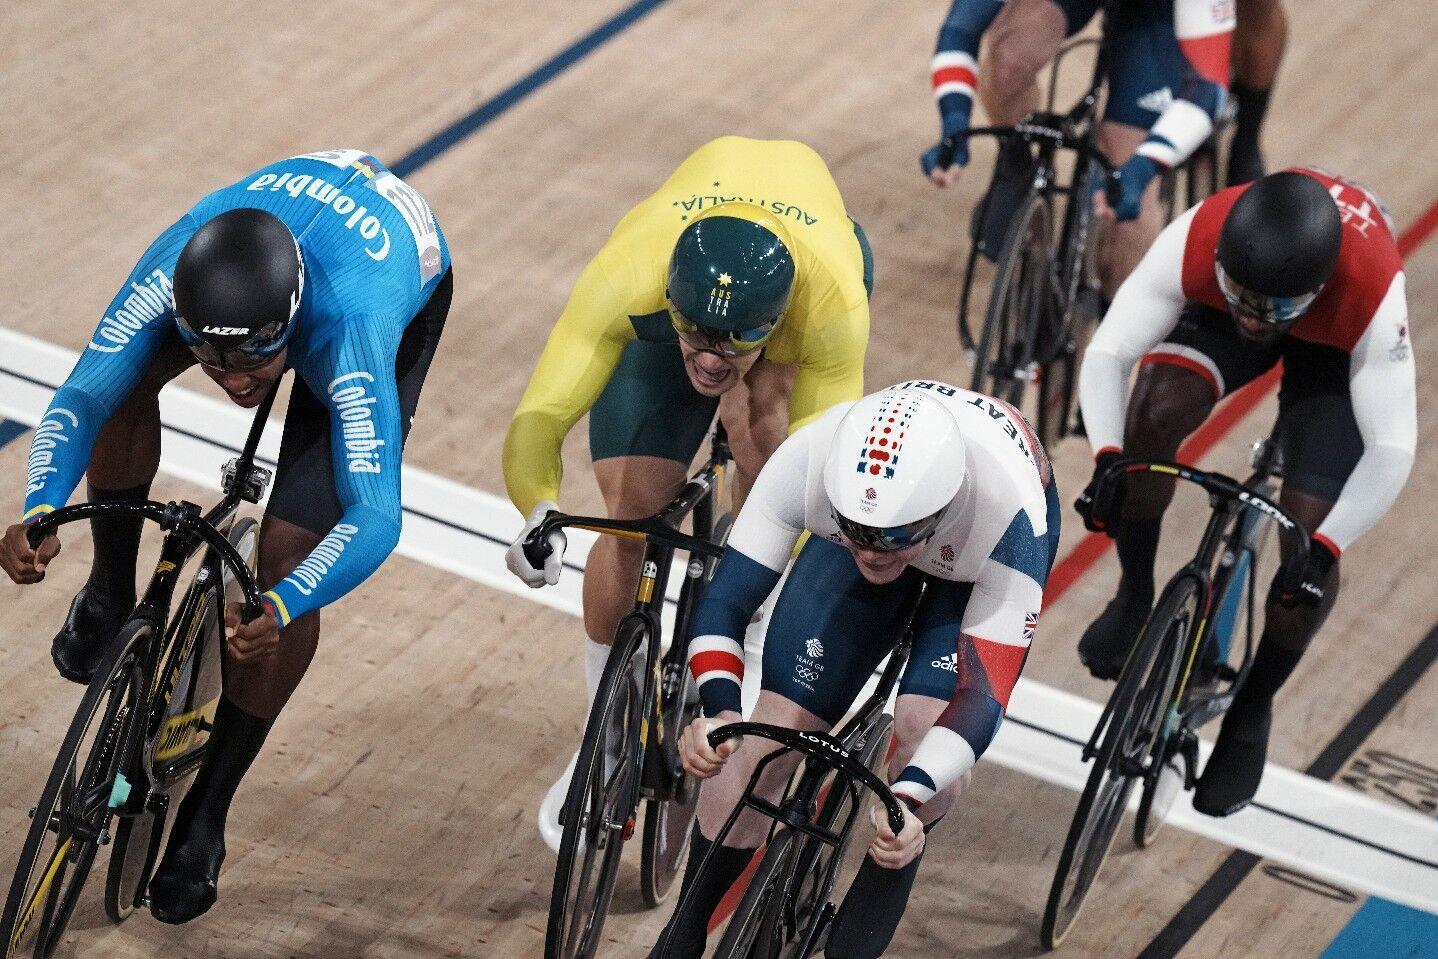 SPRINT ON: Colombia’s Kevin Santiago Quintero, left to right, Australian Matthew Glaetzer, Britain’s Jack Carlin and T&T’s Kwesi Browne compete in a semi-final heat of the Men’s Keirin race, at the 2020 Summer Olympics, in Izu, Japan, yesterday. —Photo: AP